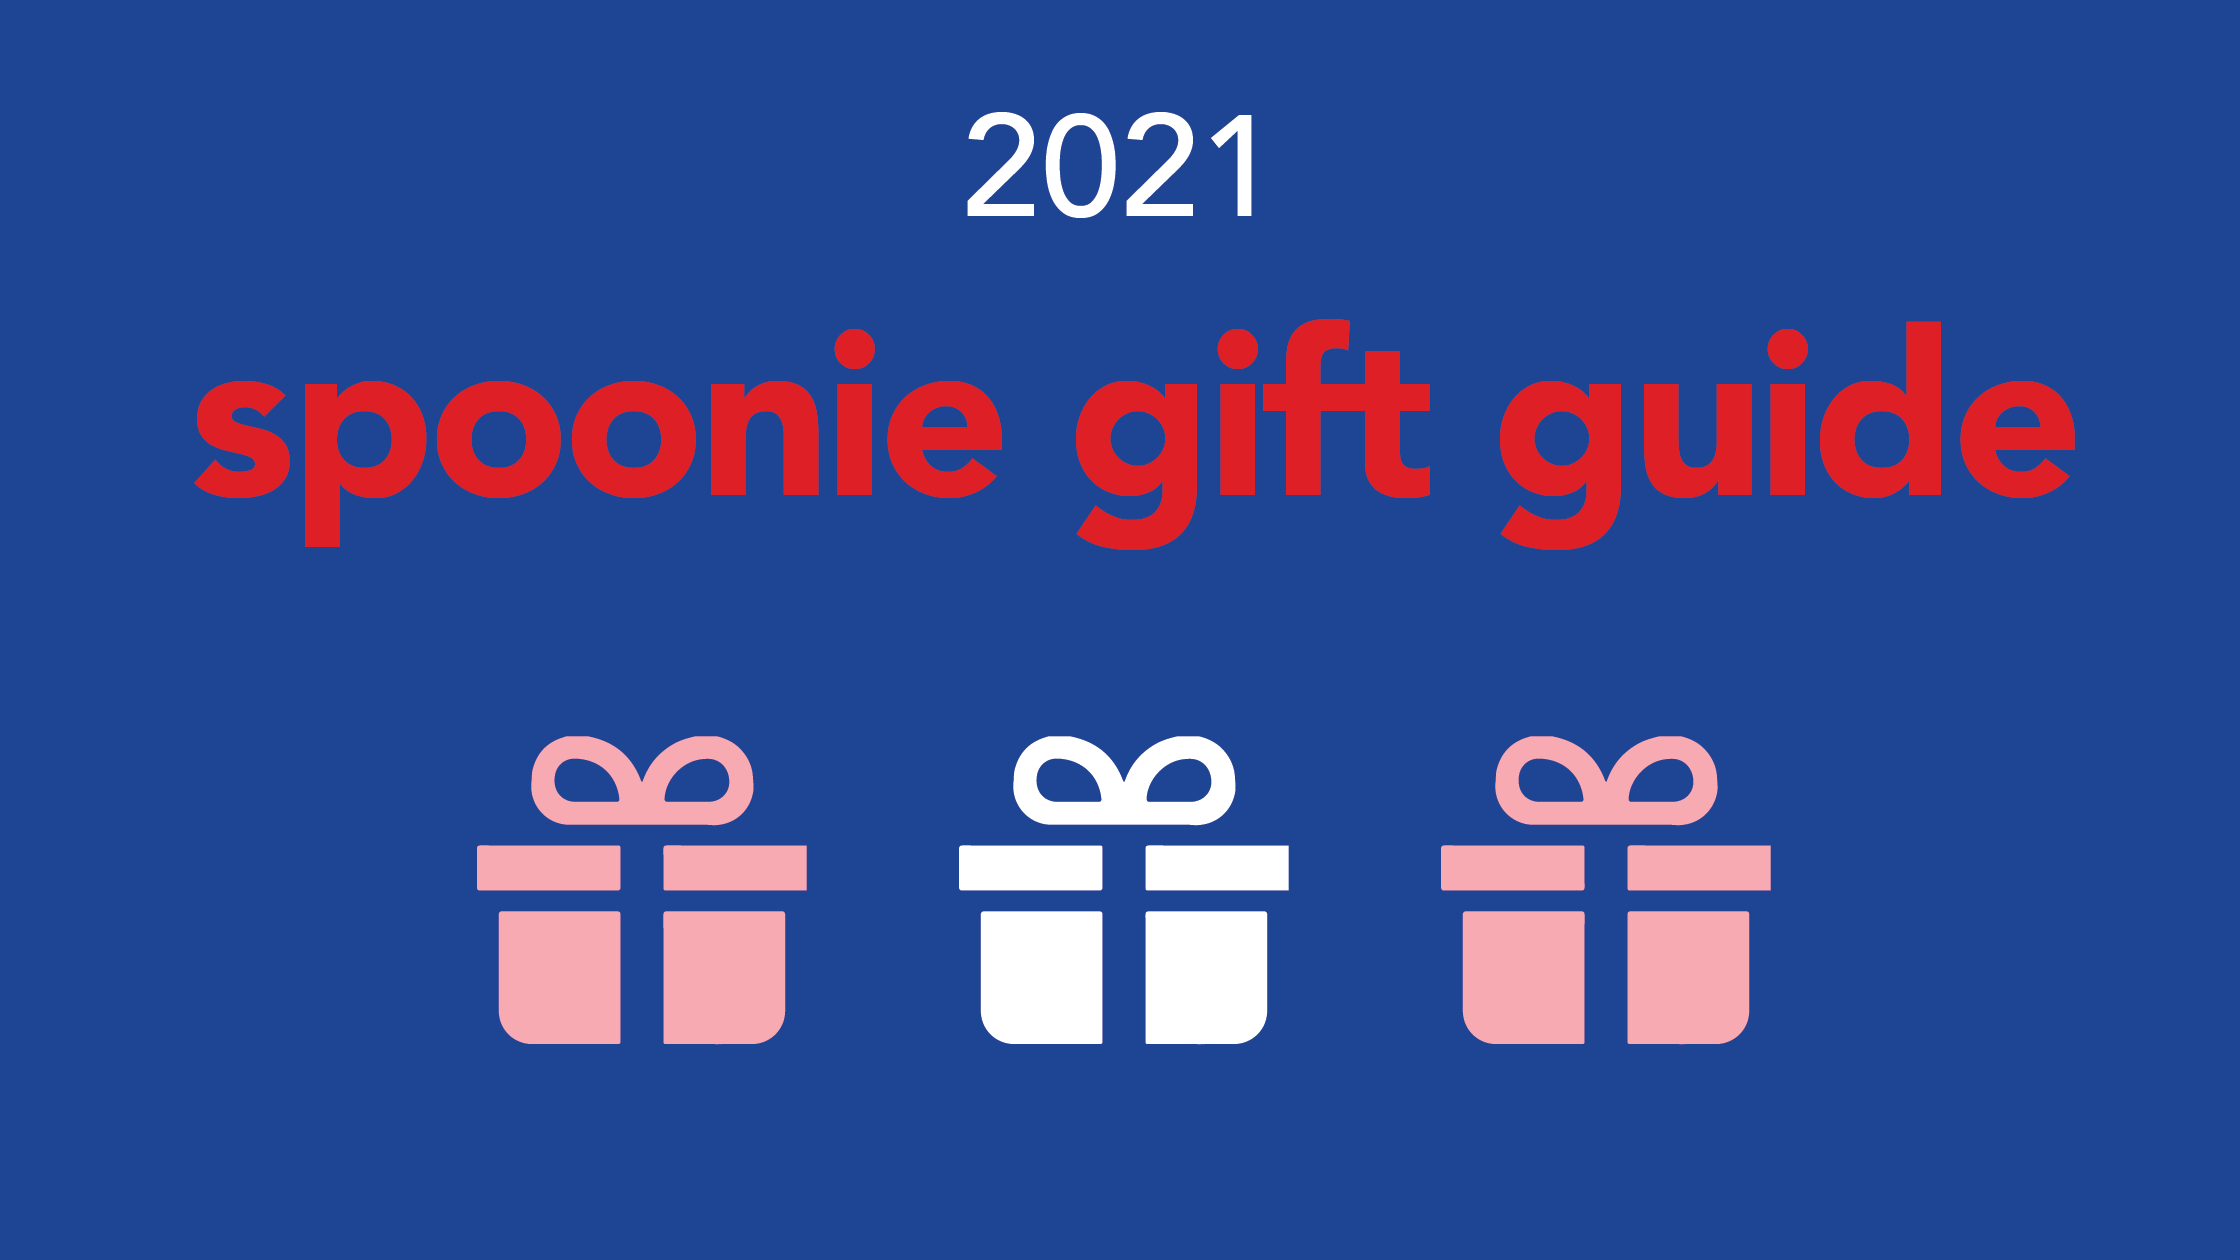 graphic with text "spoonie gift guide 2021"